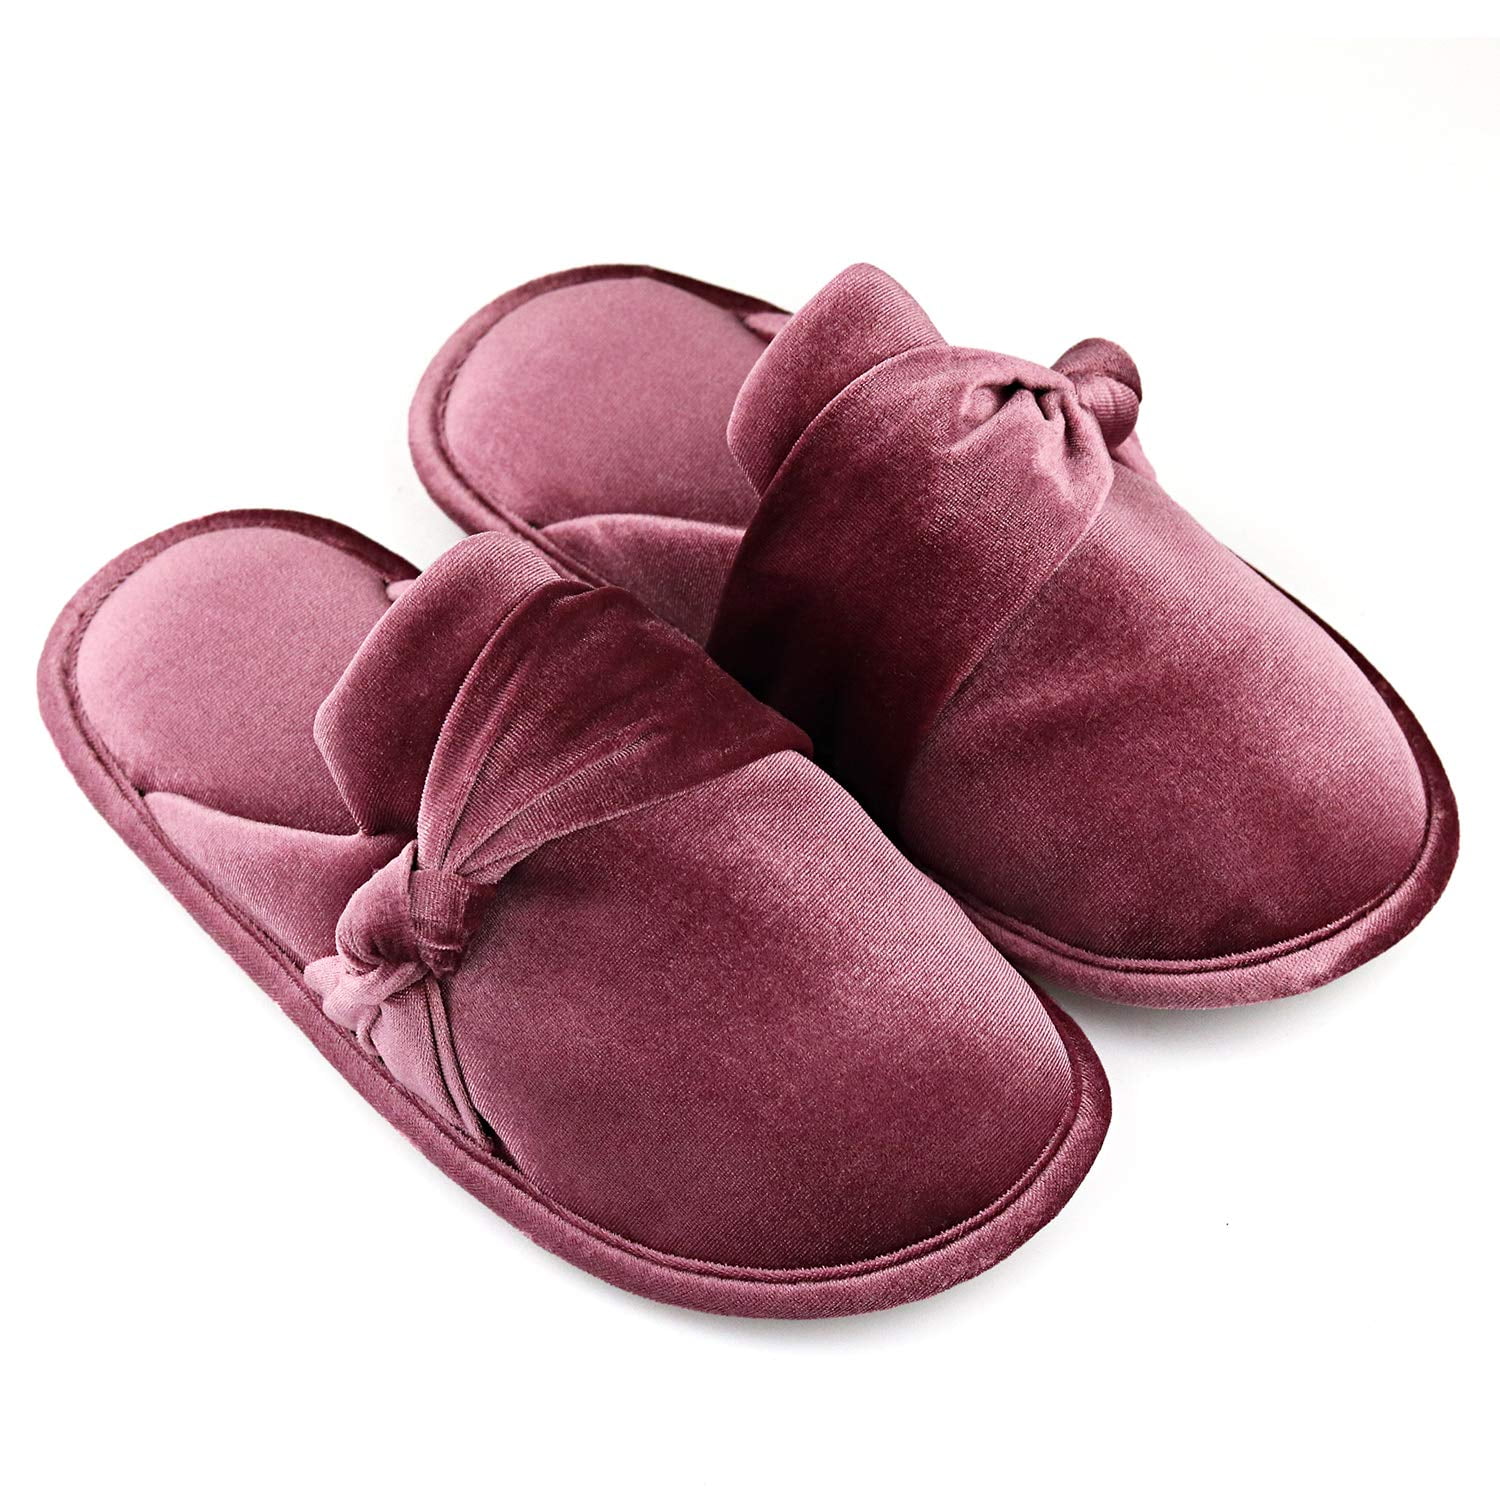 Ladies Bedroom Slippers Cheaper Than Retail Price Buy Clothing Accessories And Lifestyle 